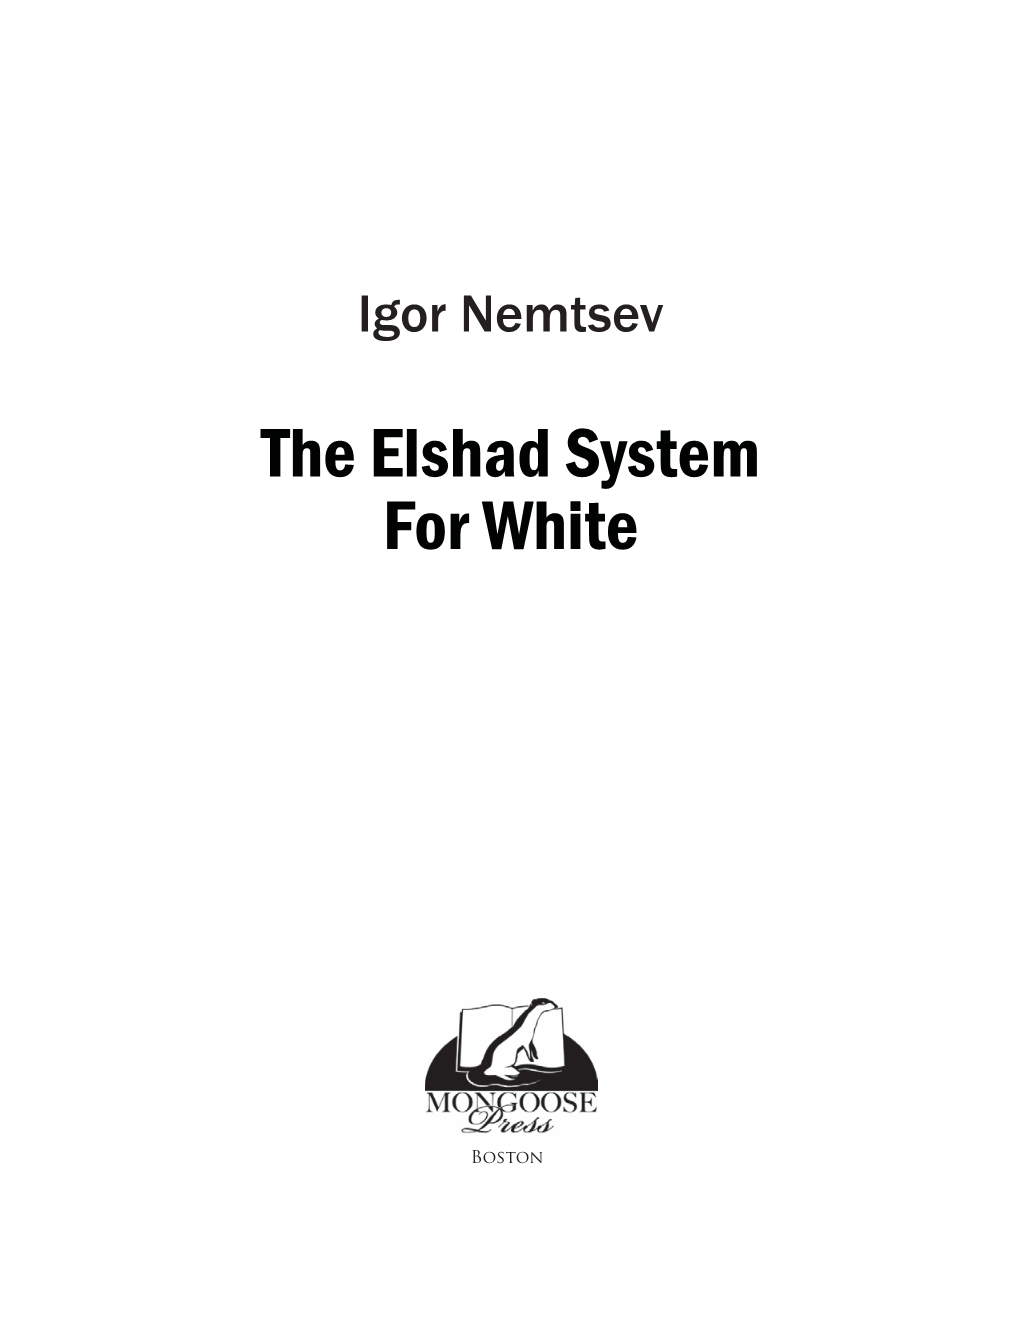 The Elshad System for White